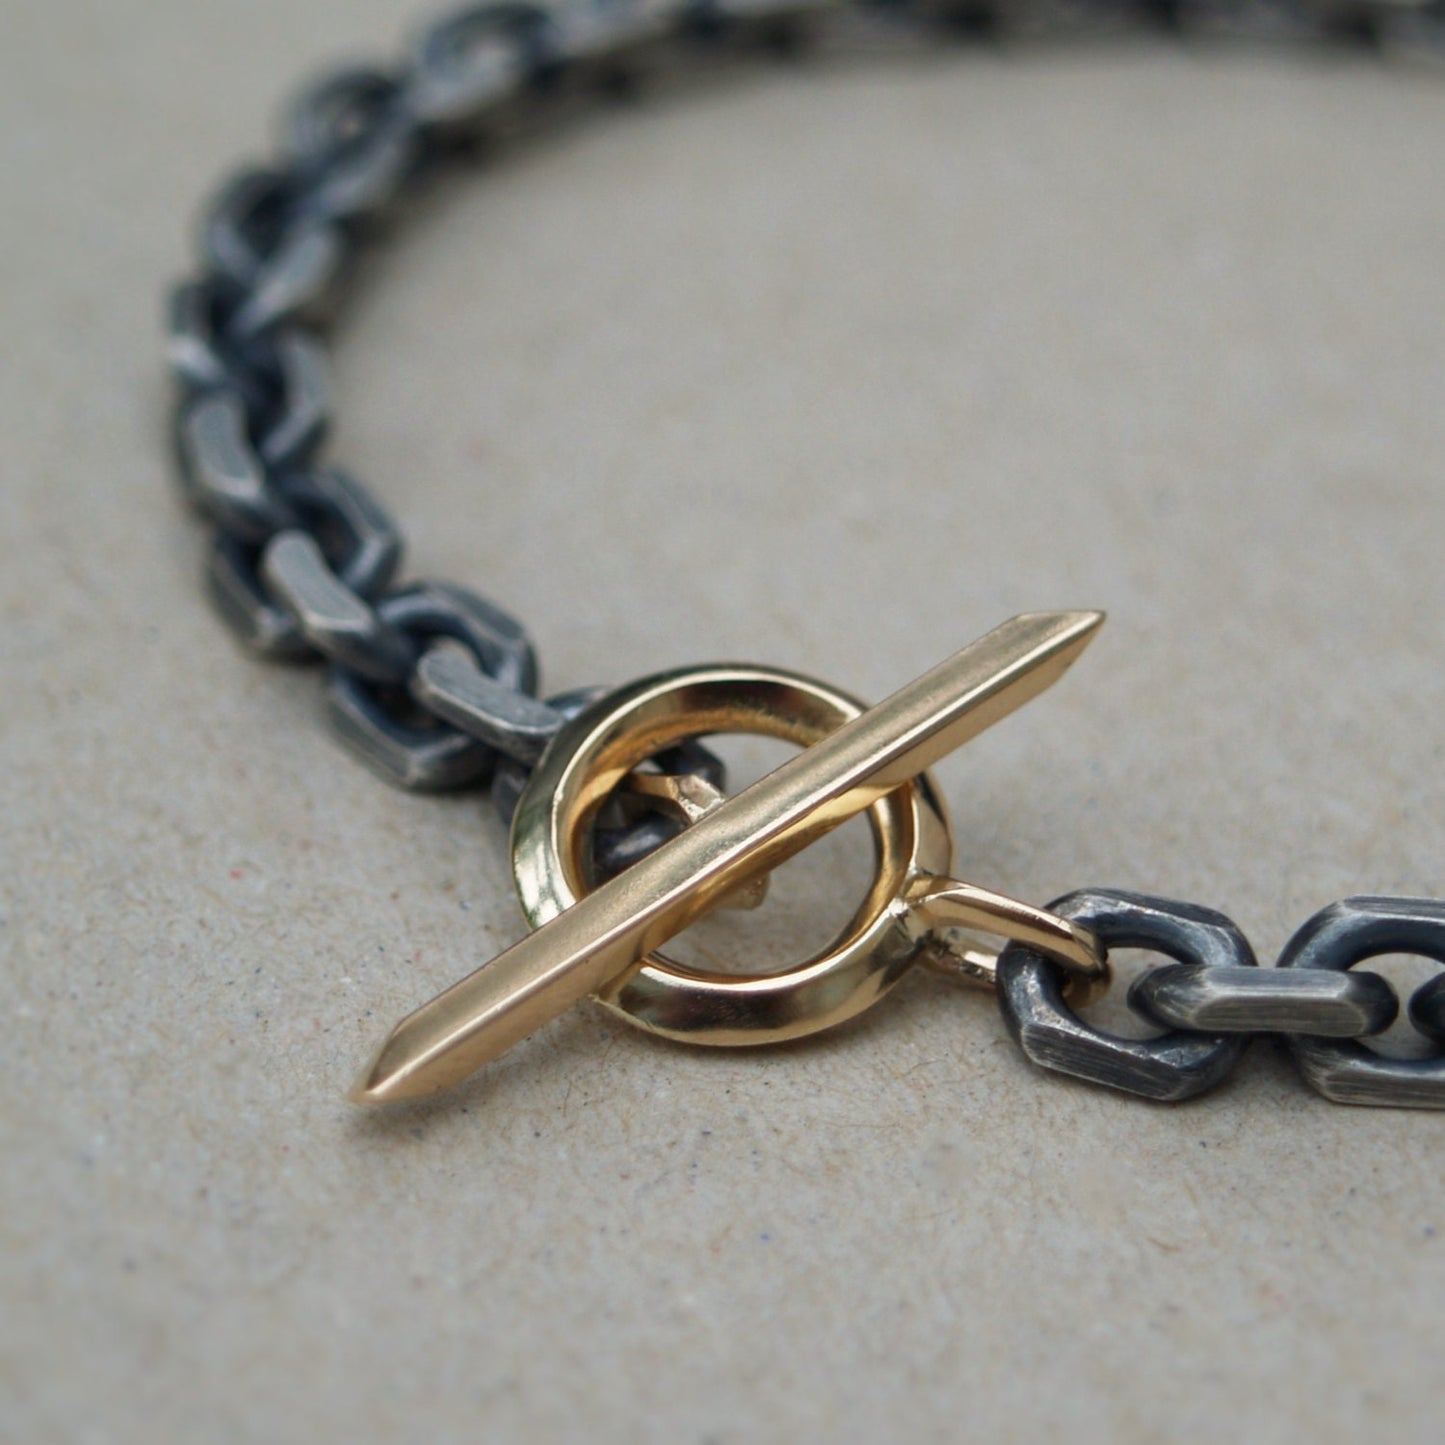 Handmade to order - Oxidised or polished solid silver 6.6mm wide diamond cut trace chain bracelet with a unique handmade 9ct yellow gold T-bar